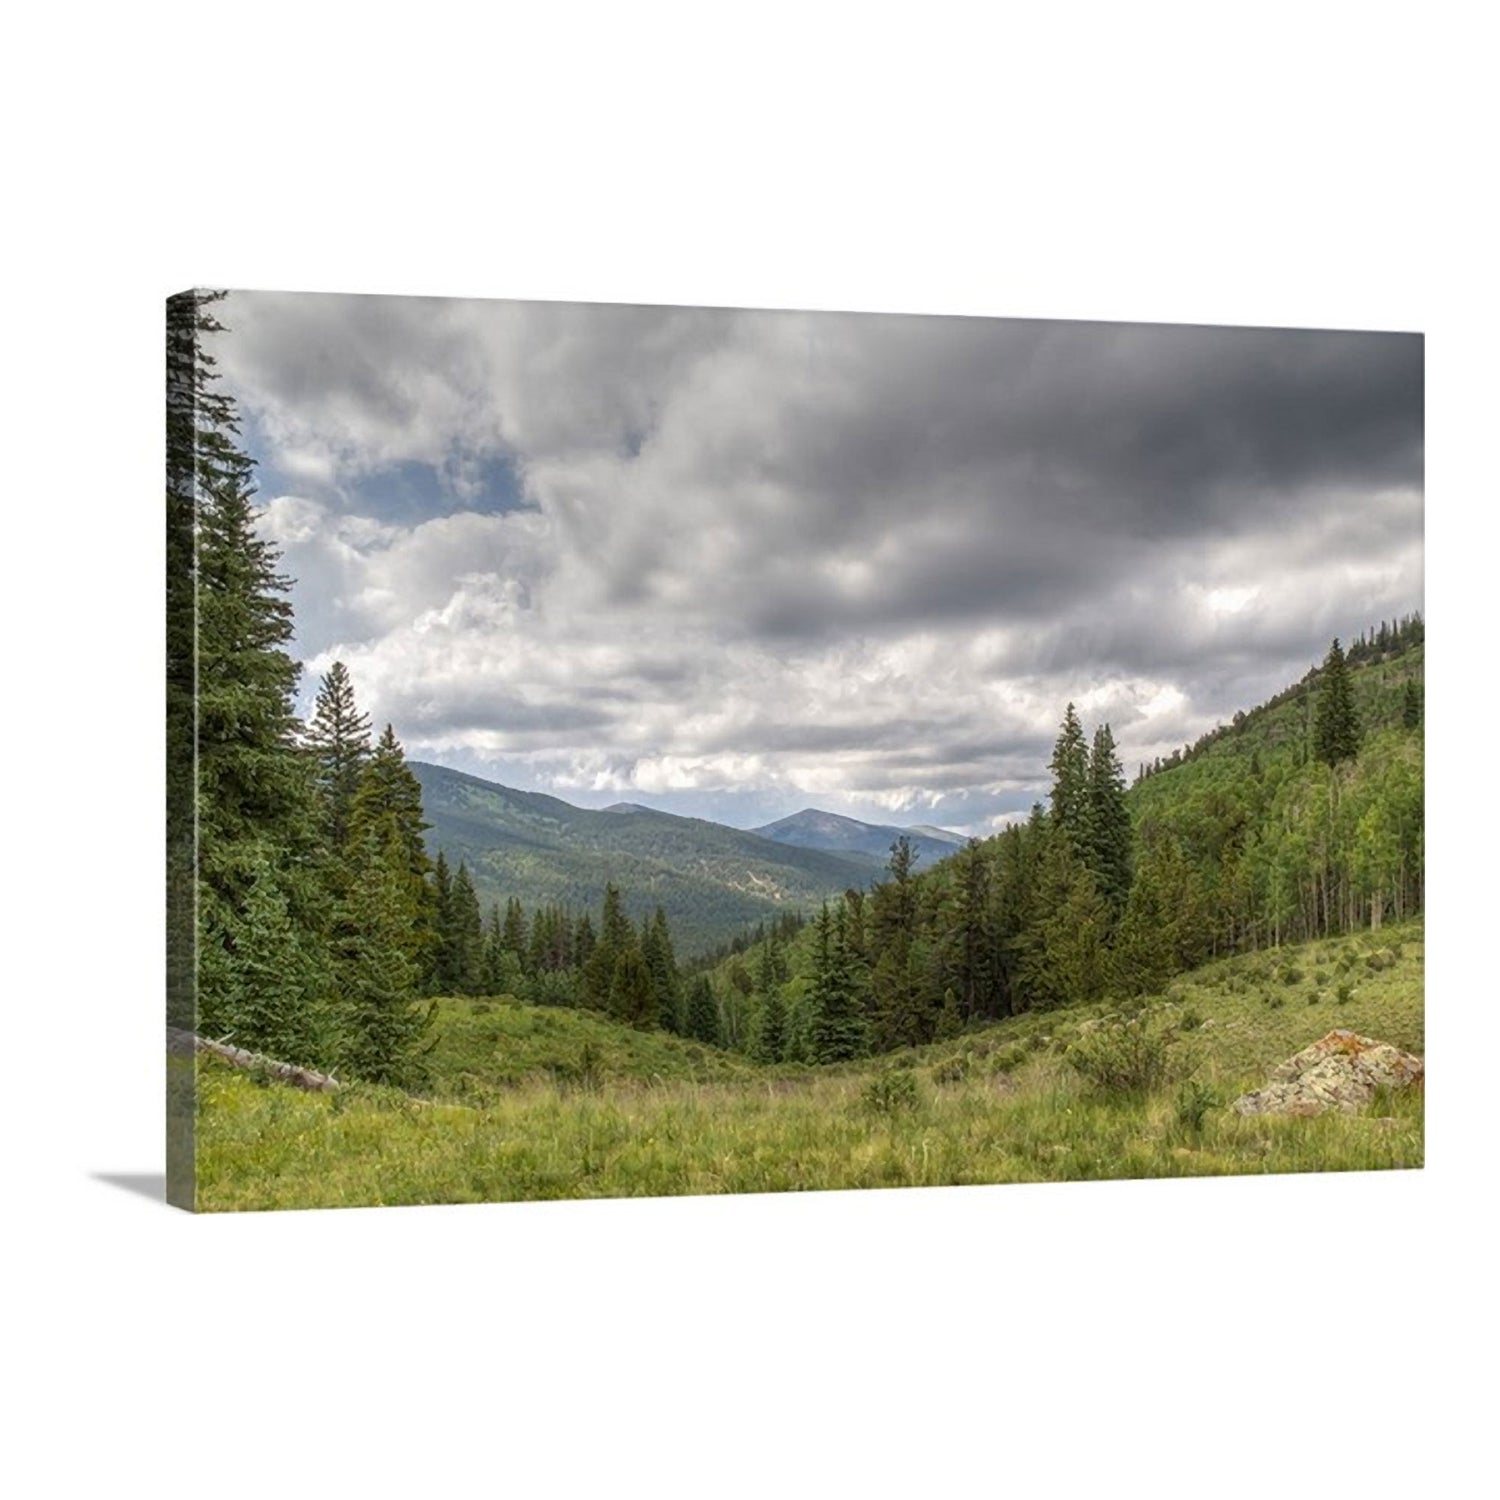 Nature photography canvas wall art featuring a view of Buffalo Peaks in the Colorado Rocky Mountains